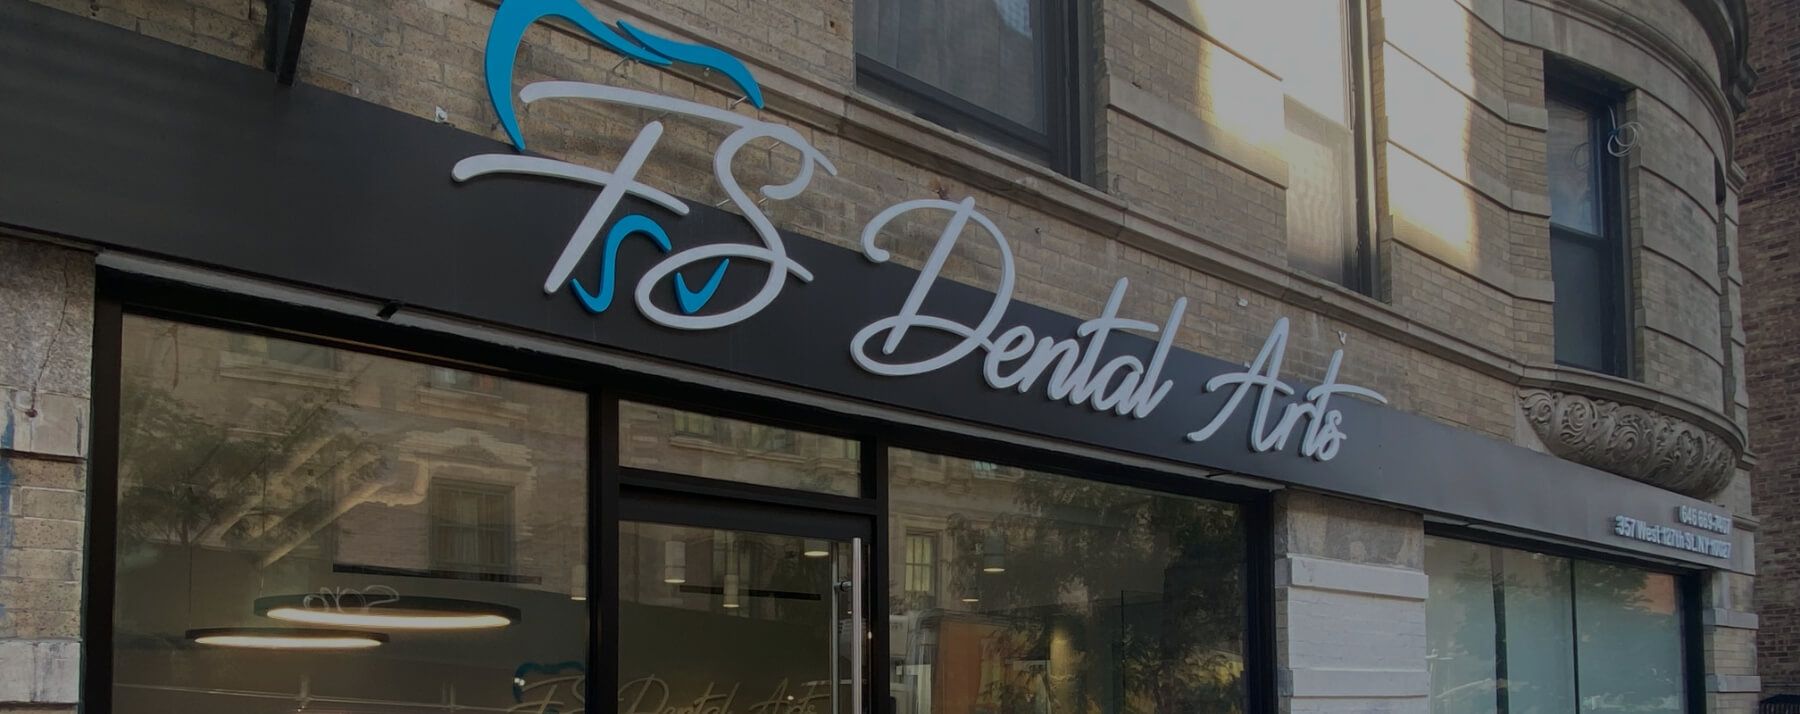 Outside view of F S Dental Arts